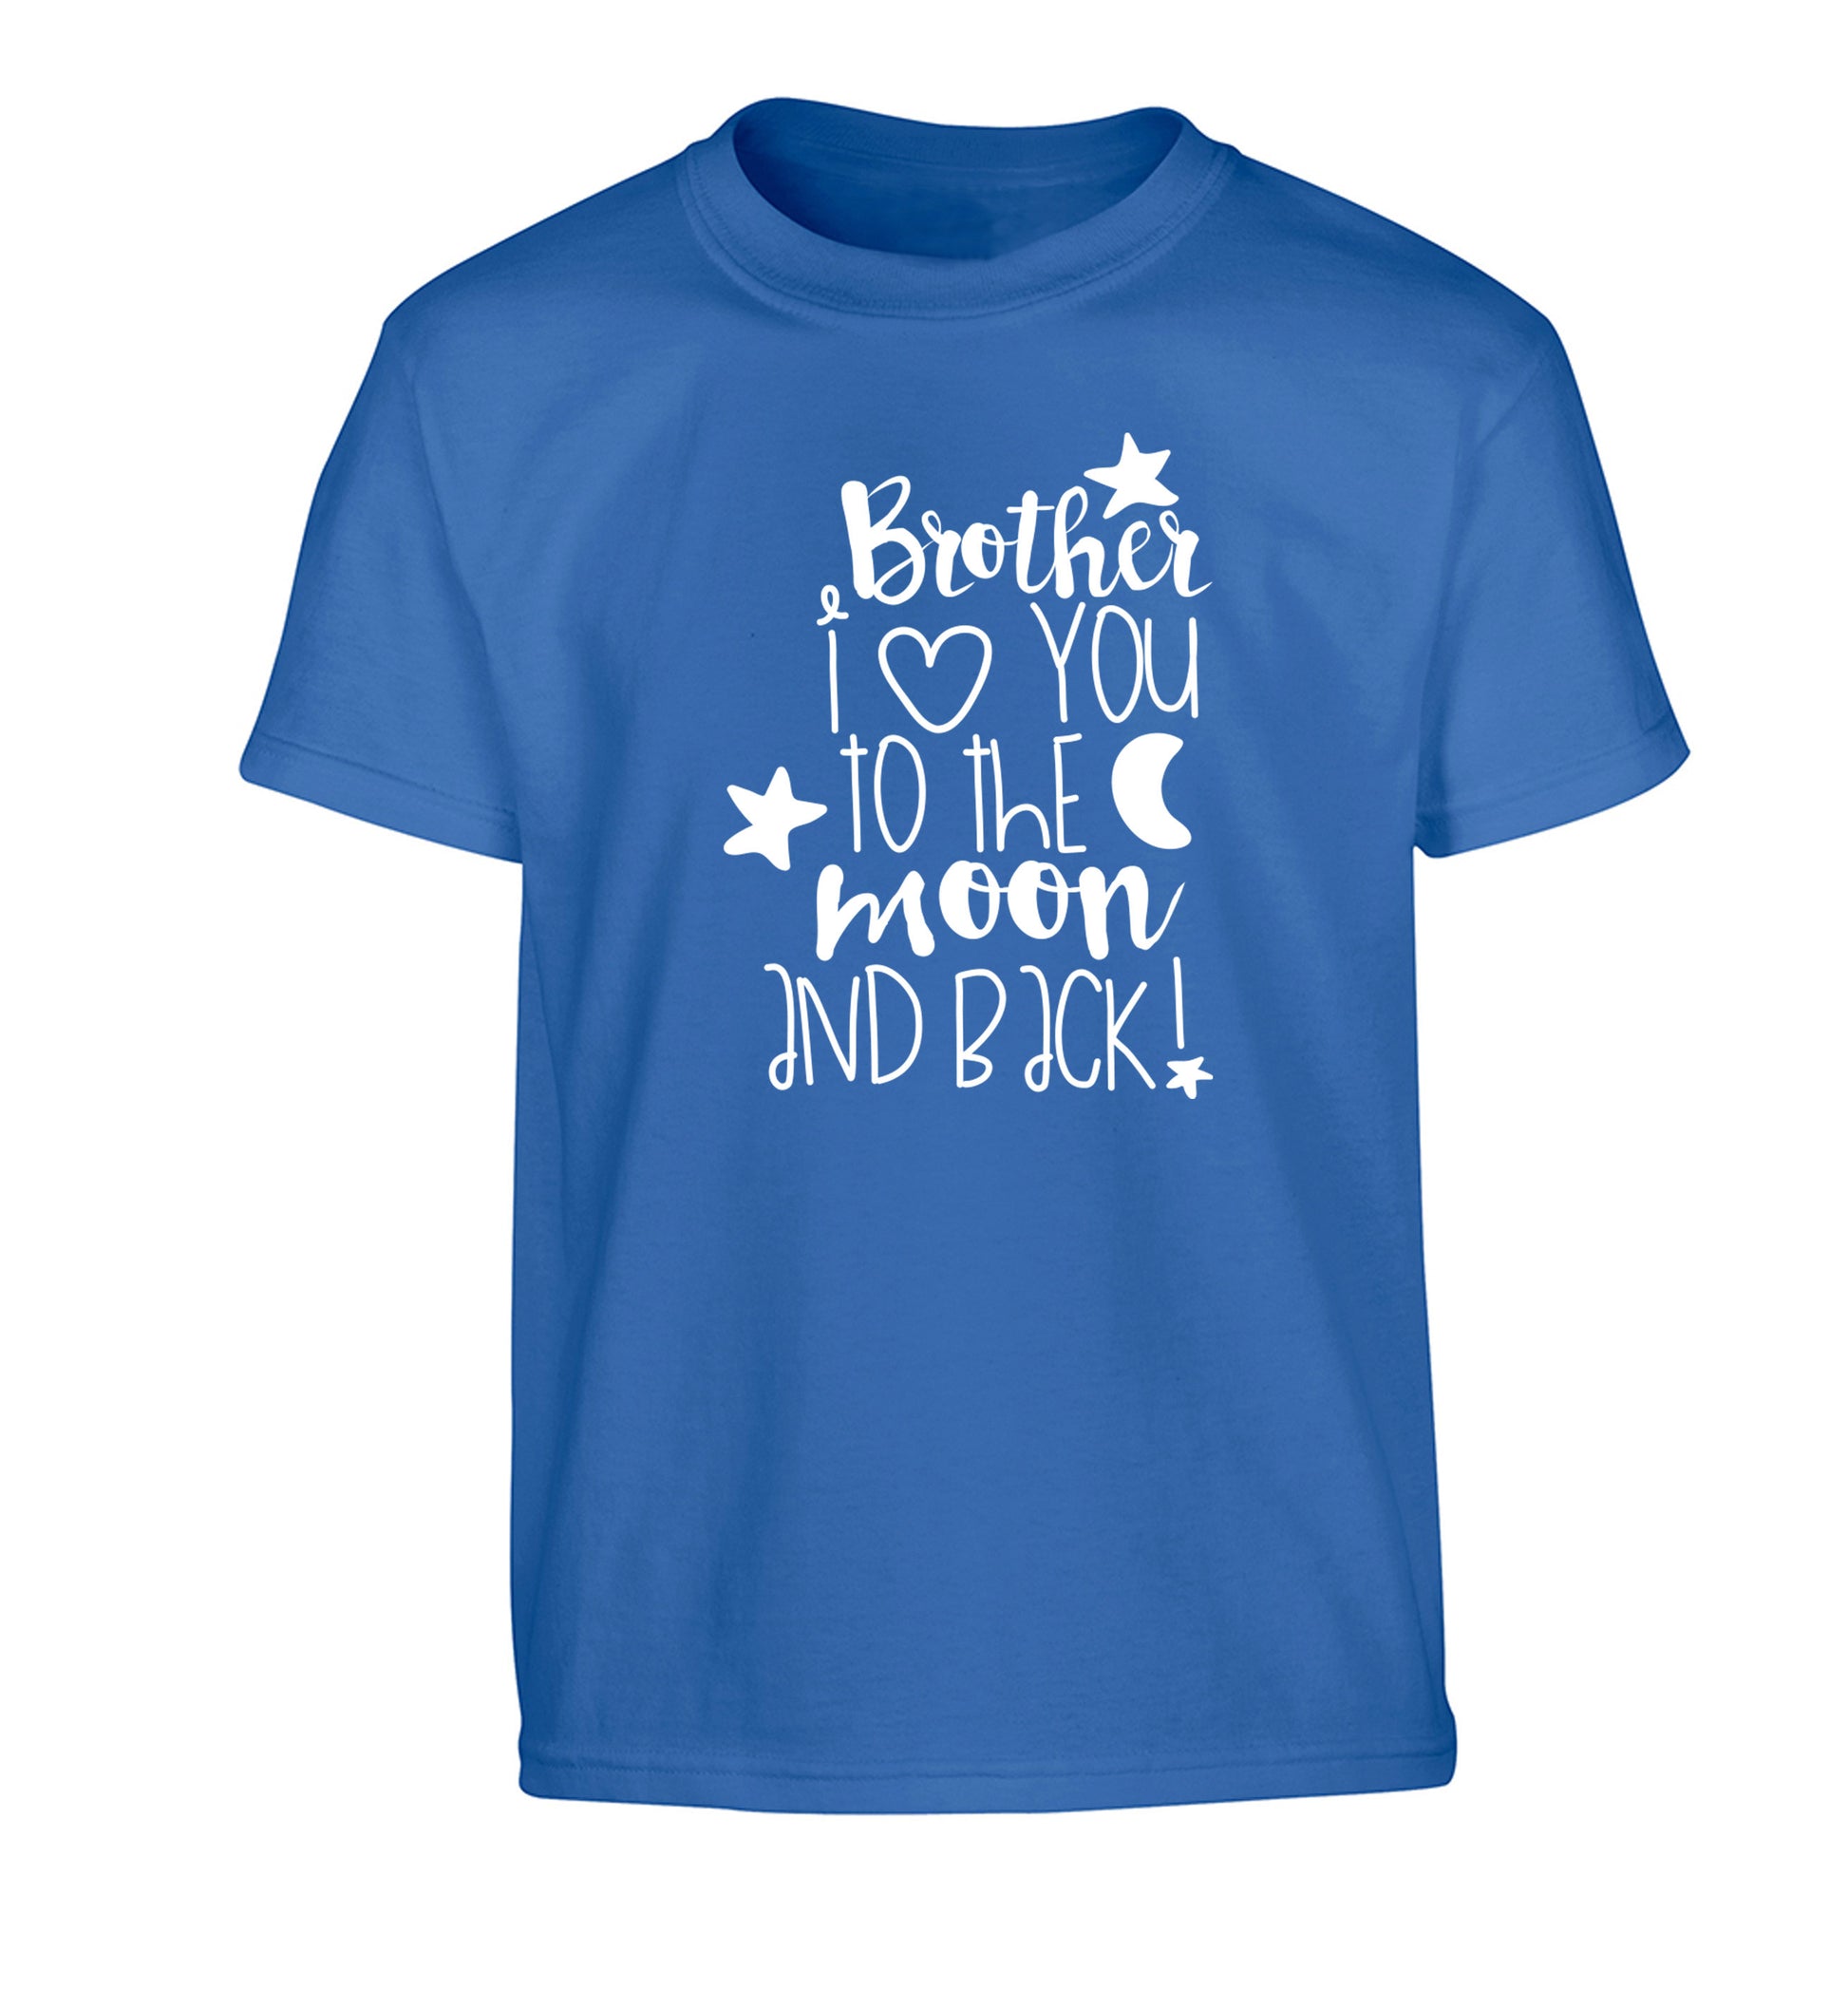 Brother I love you to the moon and back Children's blue Tshirt 12-14 Years